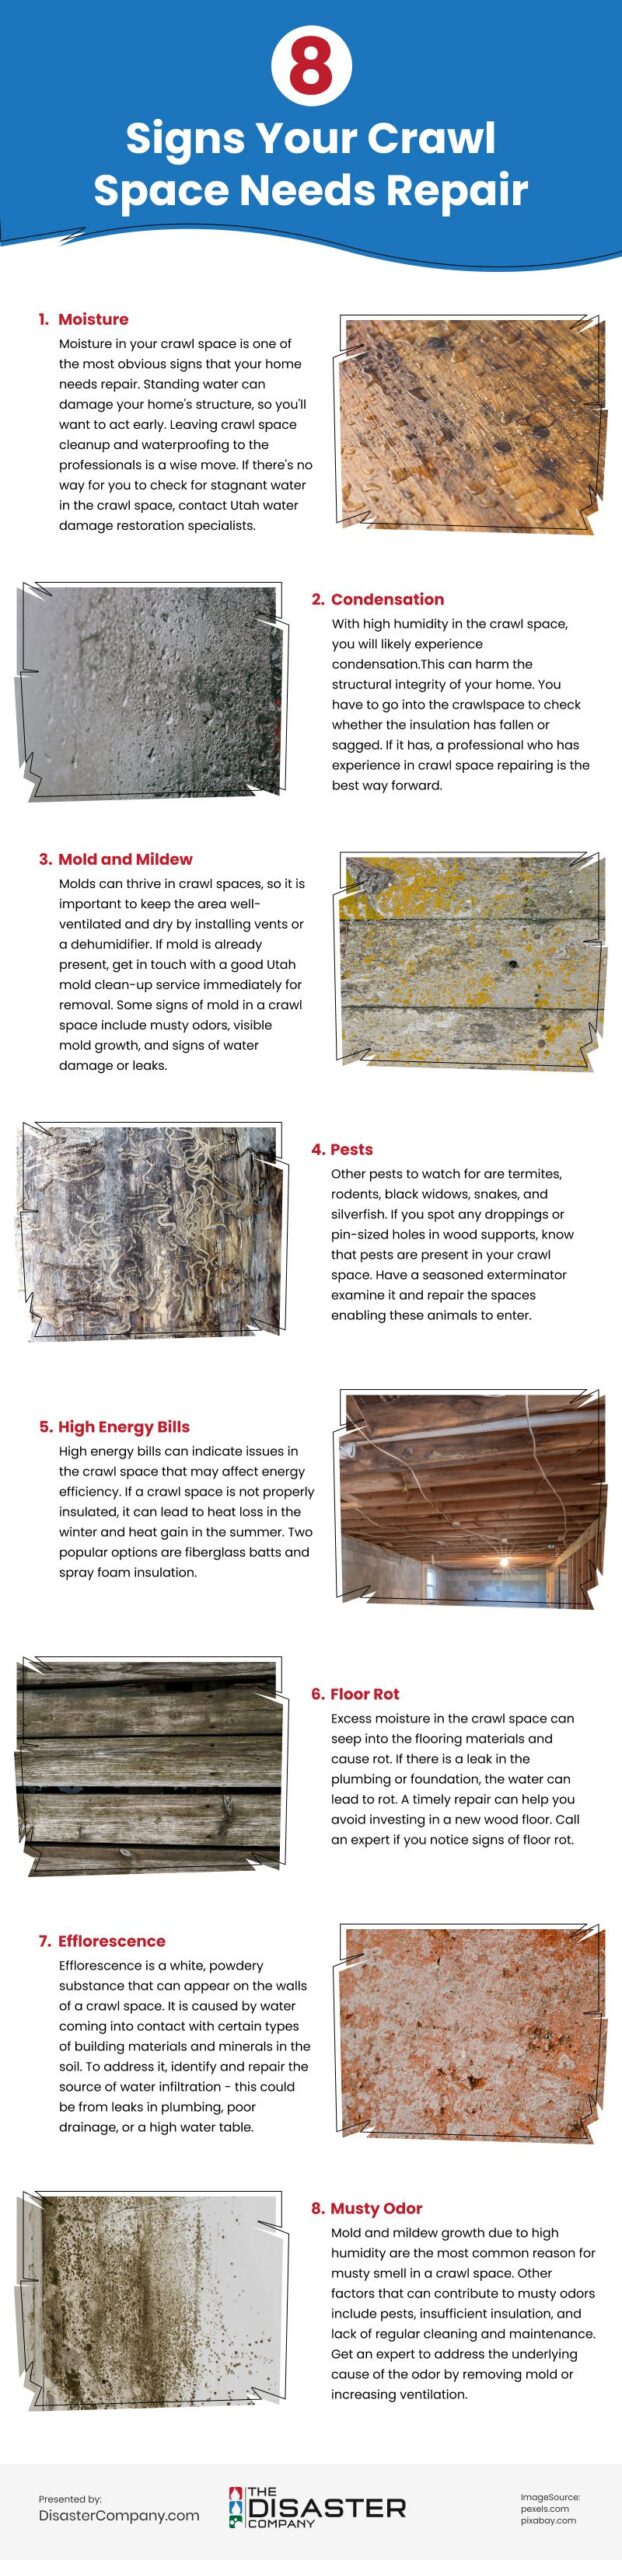 8 Signs Your Crawl Space Needs Repair Infographic